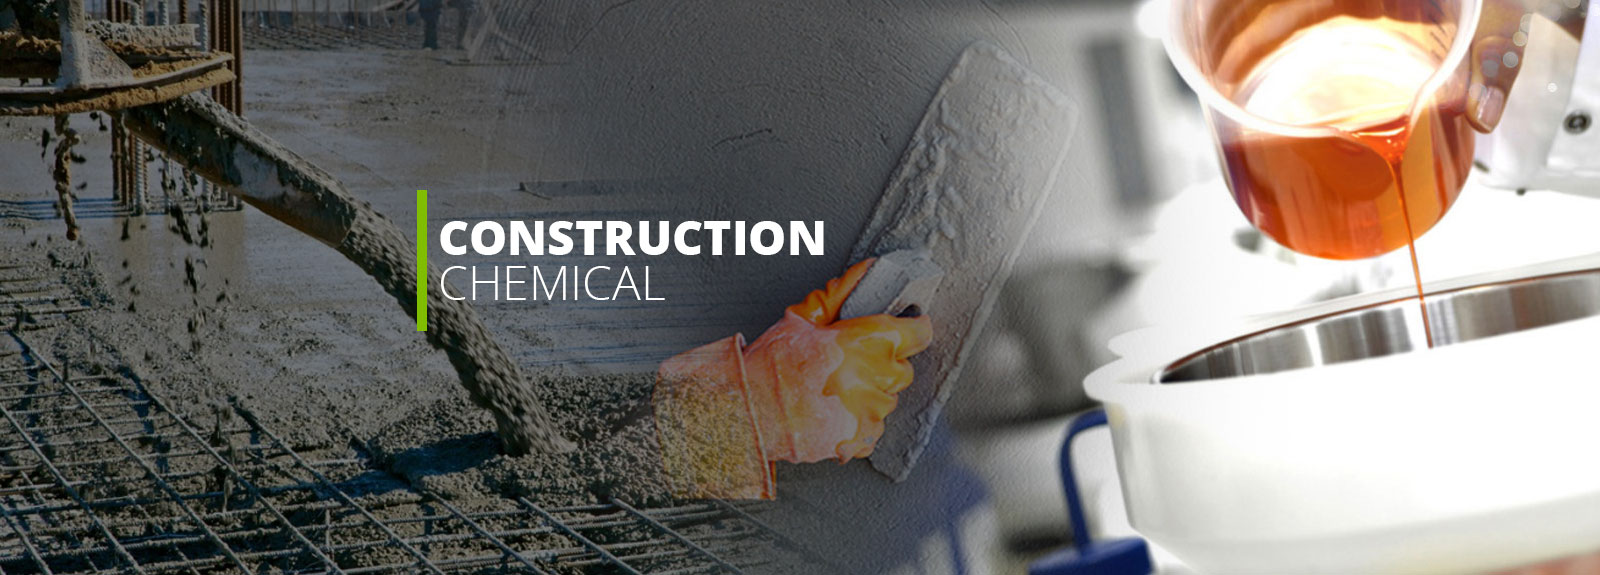 Get to Know more about the Construction Chemical Market in UAE